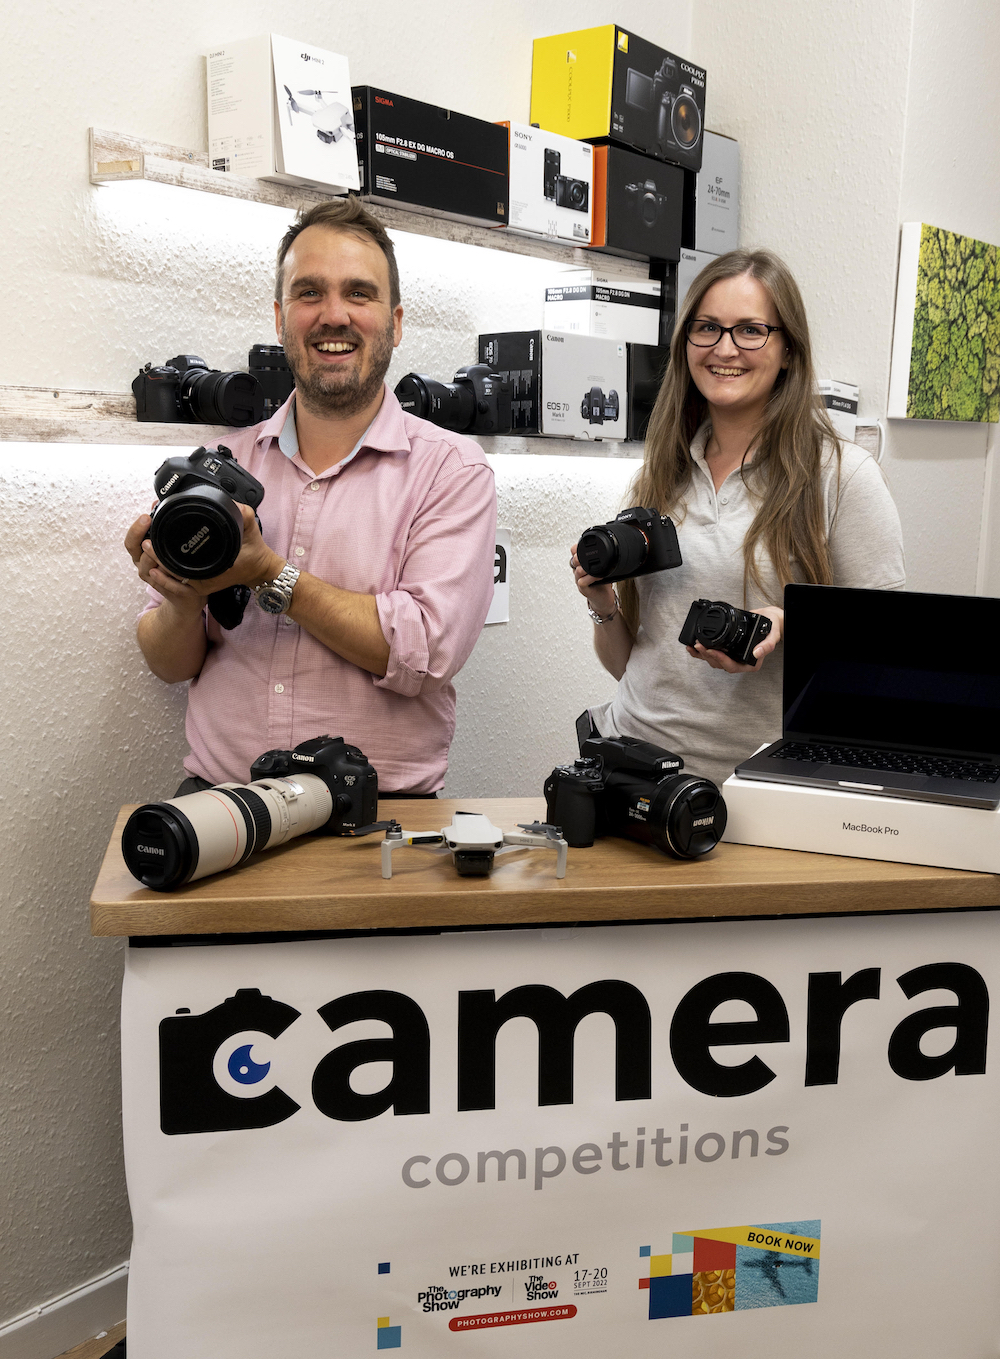 Chris Goodwin (left) and Sherralyn Neil (right) of DH James and Camera Competitions